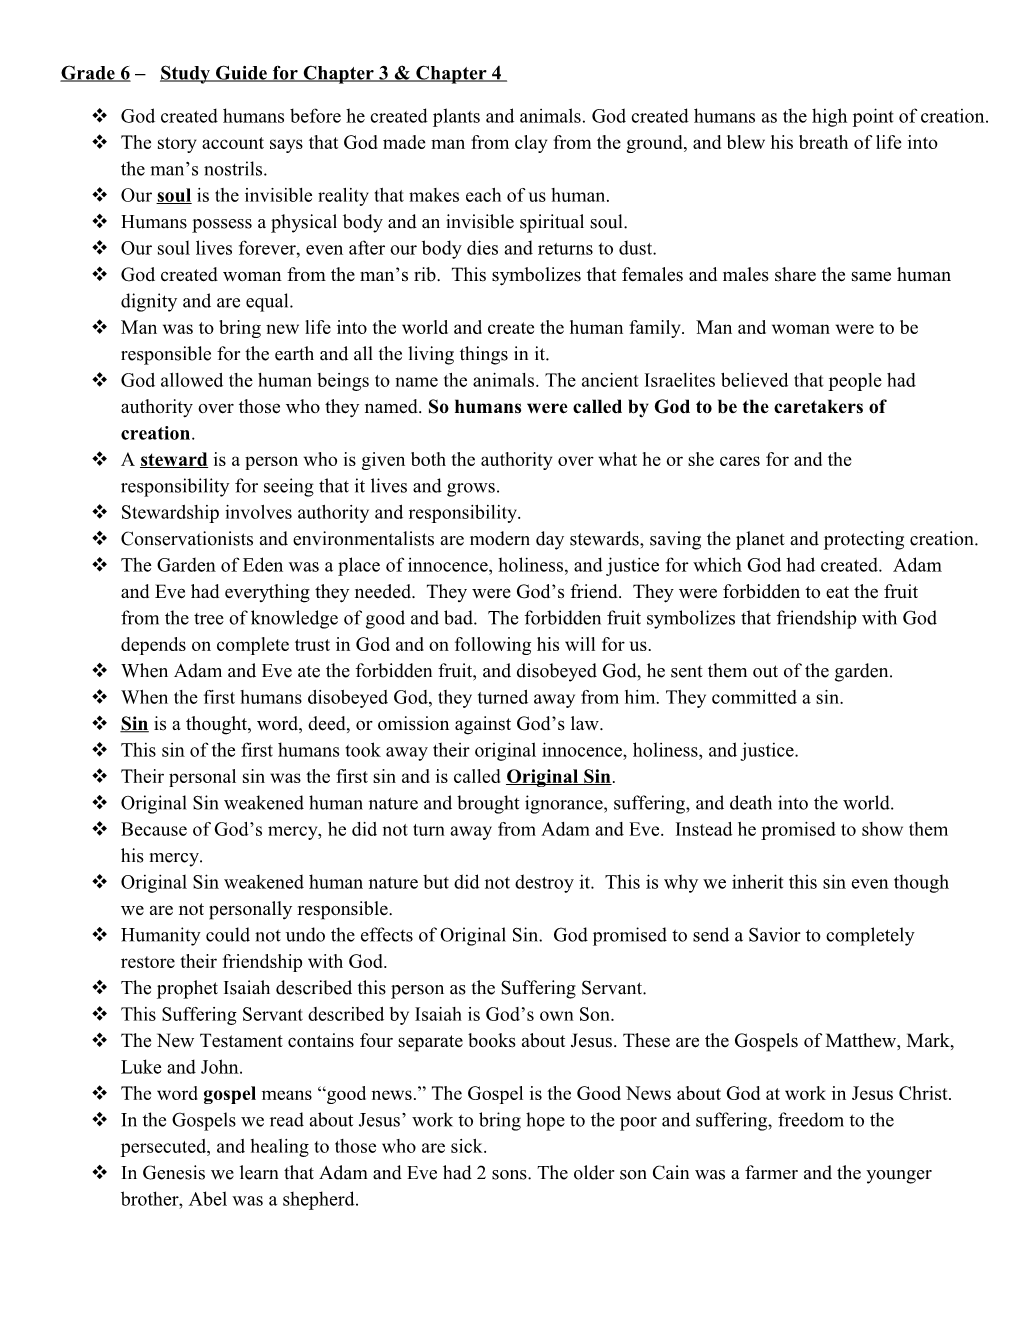 Grade 6 – Study Guide For Chapter 11